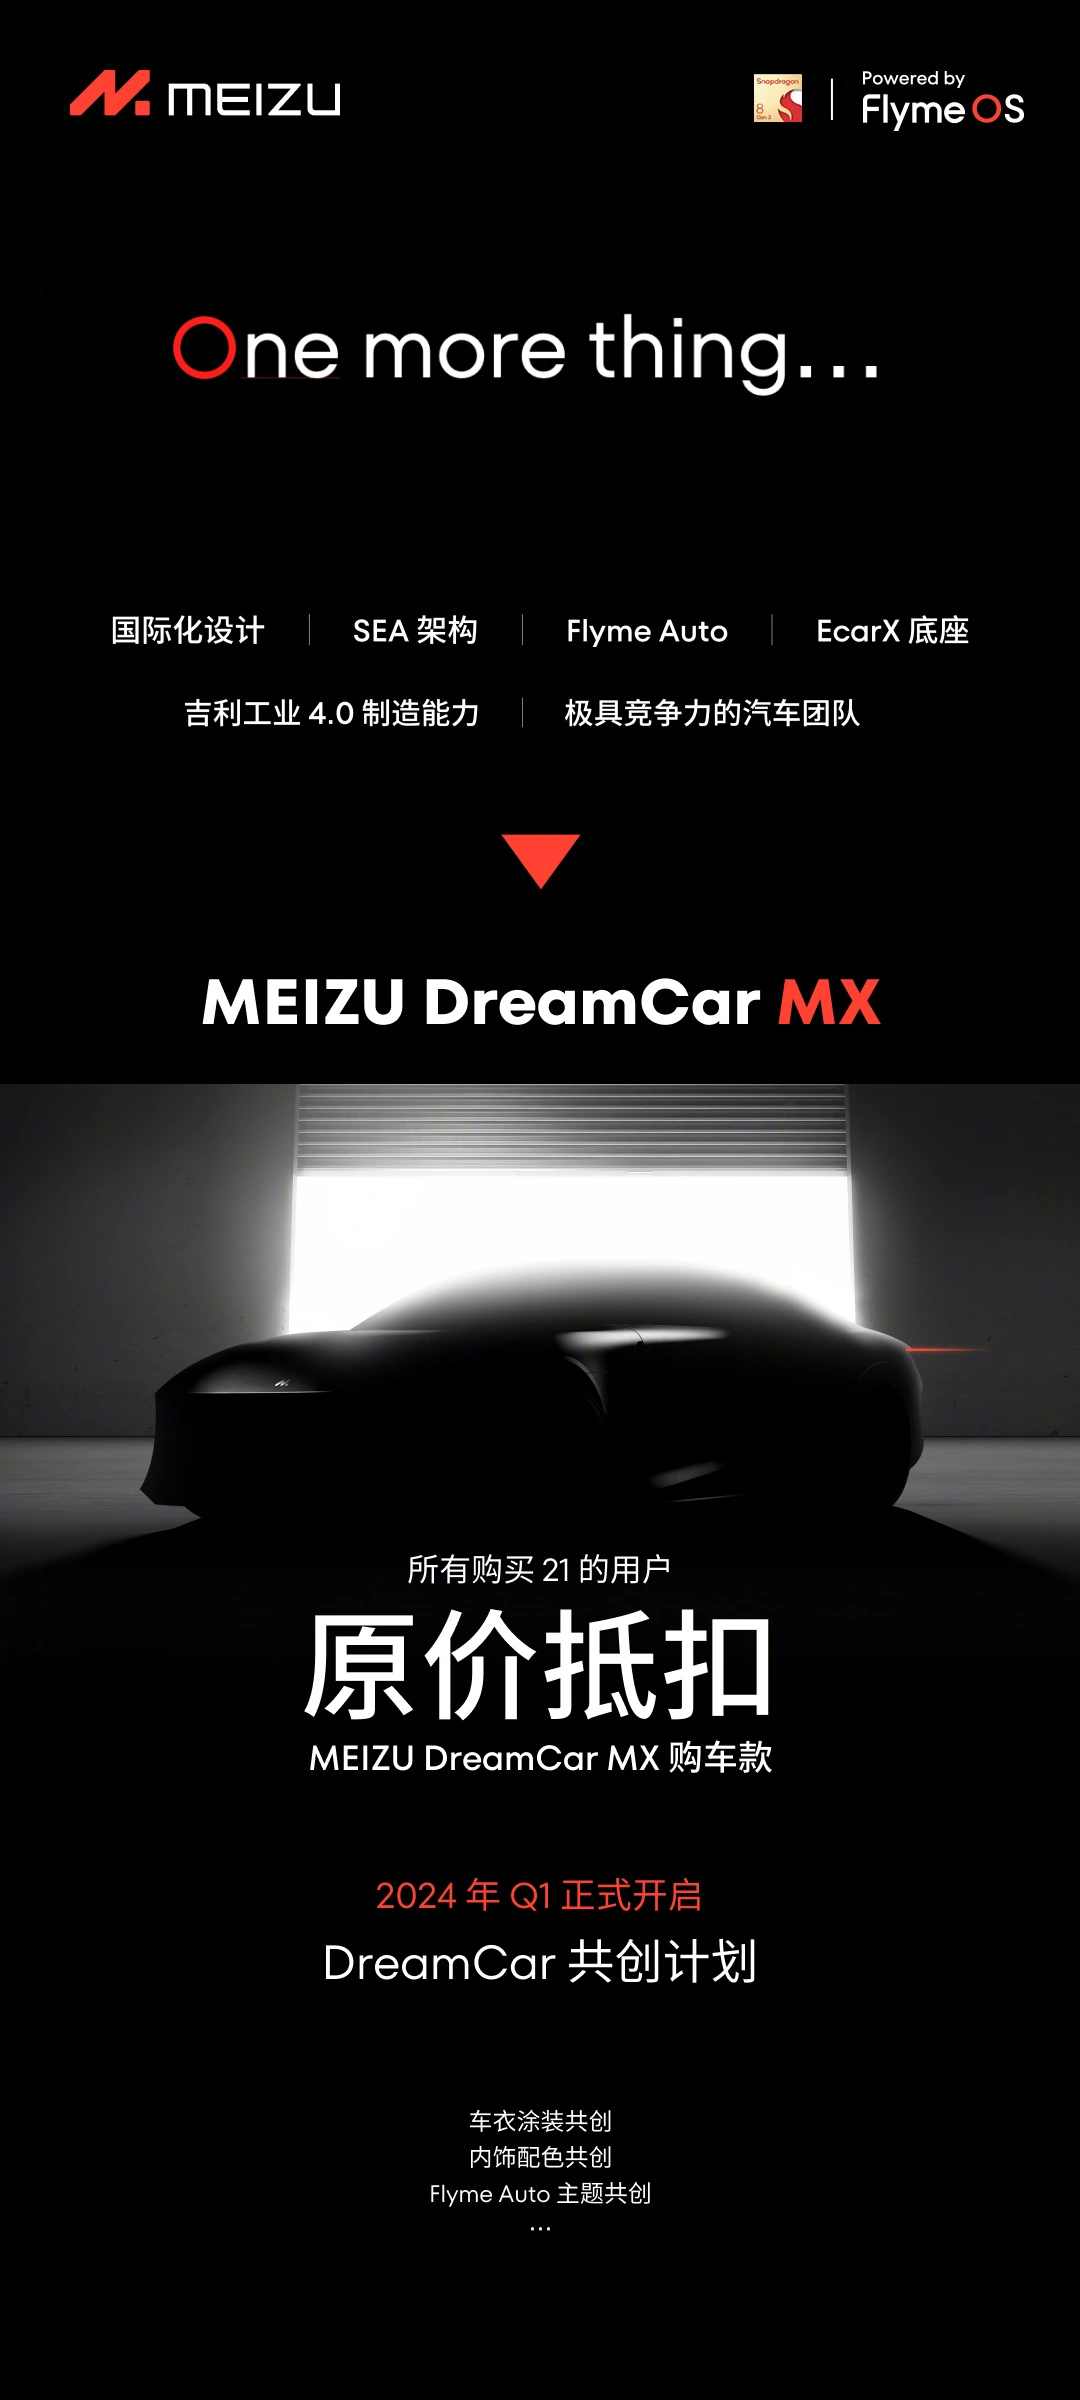 See you in the year! Xingji Meizu’s first car is highly anticipated, Liao Qinghong reveals the progress